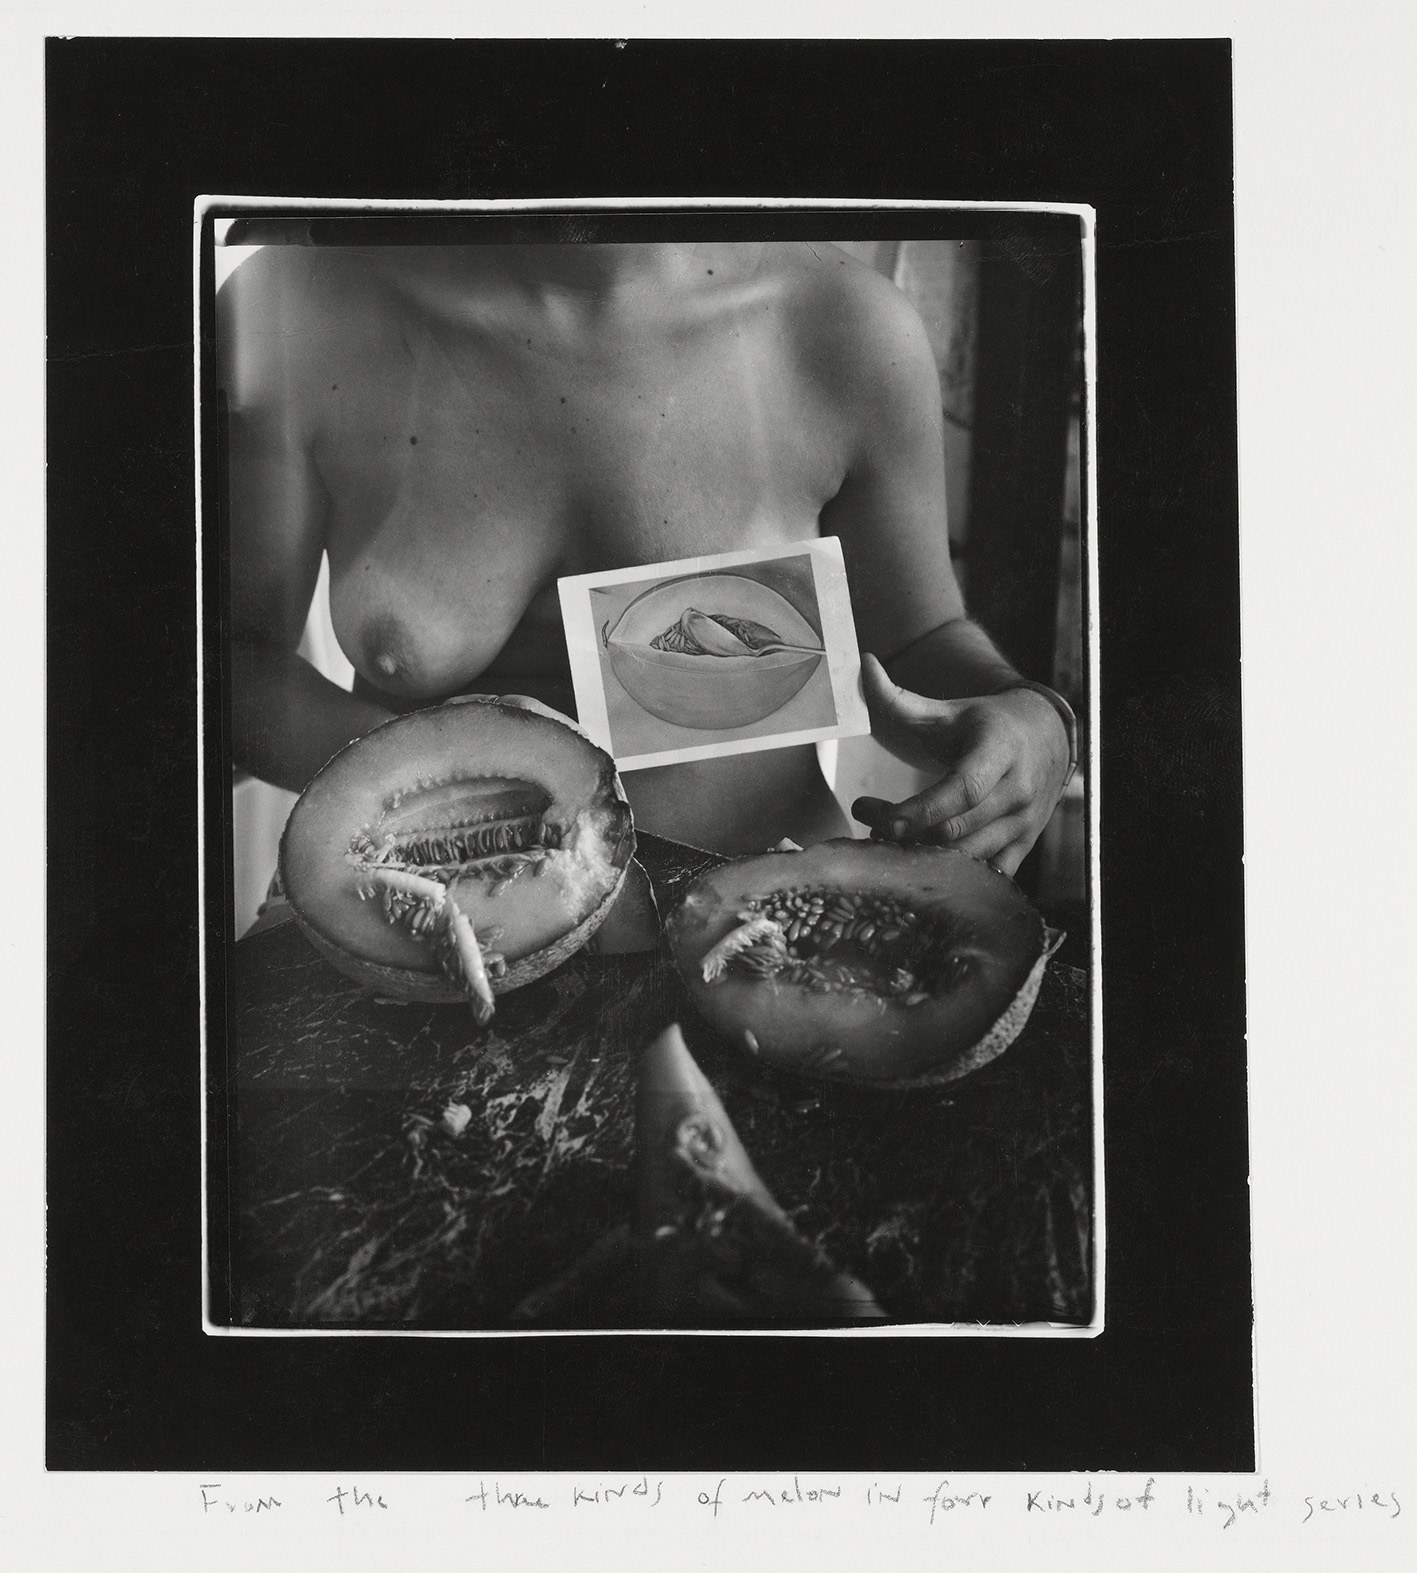 Francesca Woodman, From the three kinds of melon in four kinds of light series, Providence, Rhode Island, 1976. © George and Betty Woodman.